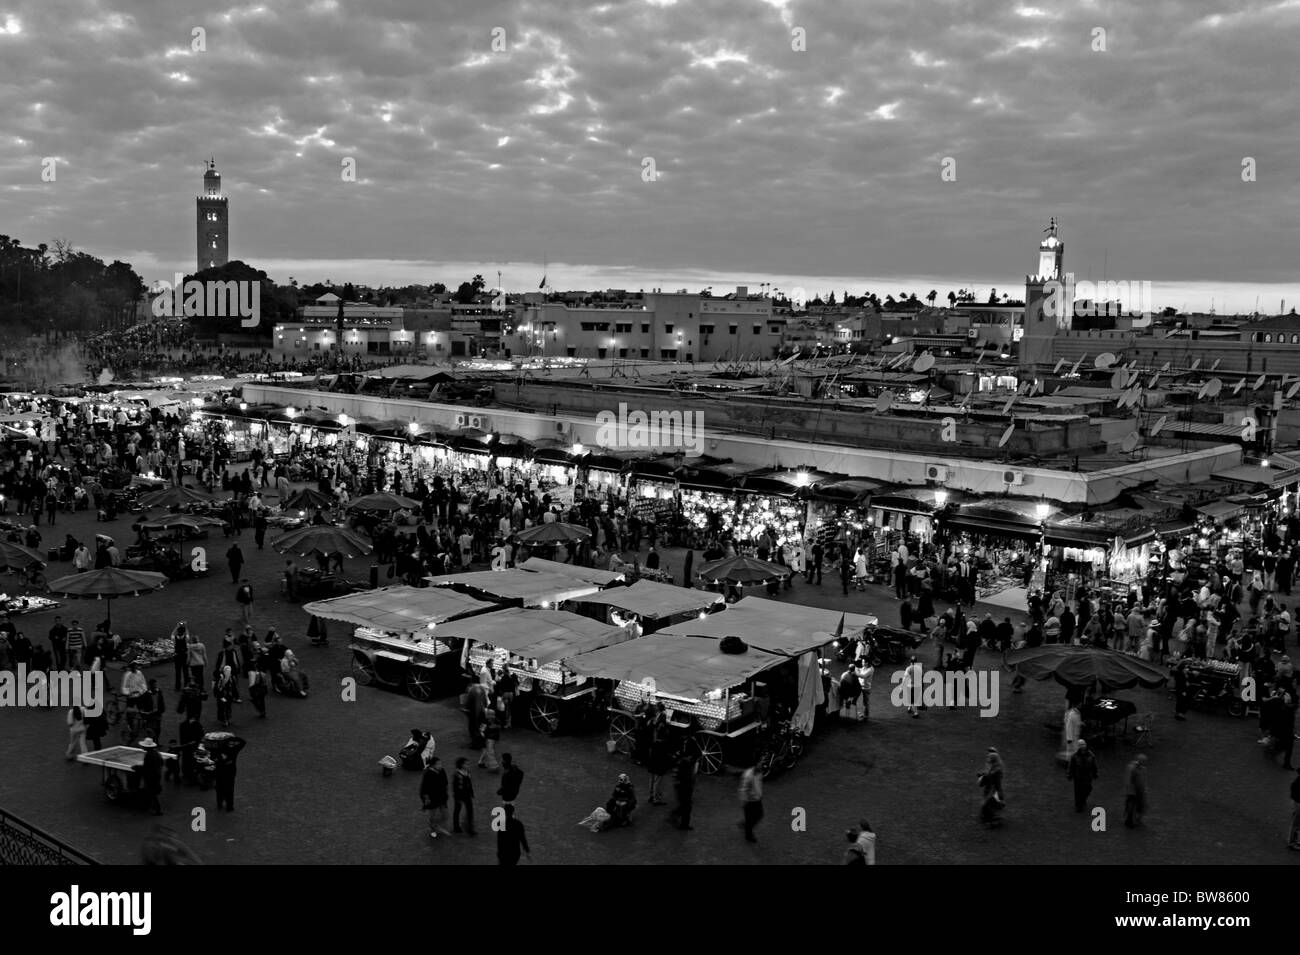 Marrakesh Morocco 2010 - The famous Djemaa El-Fna market square in Marrakech at dusk early evening Stock Photo